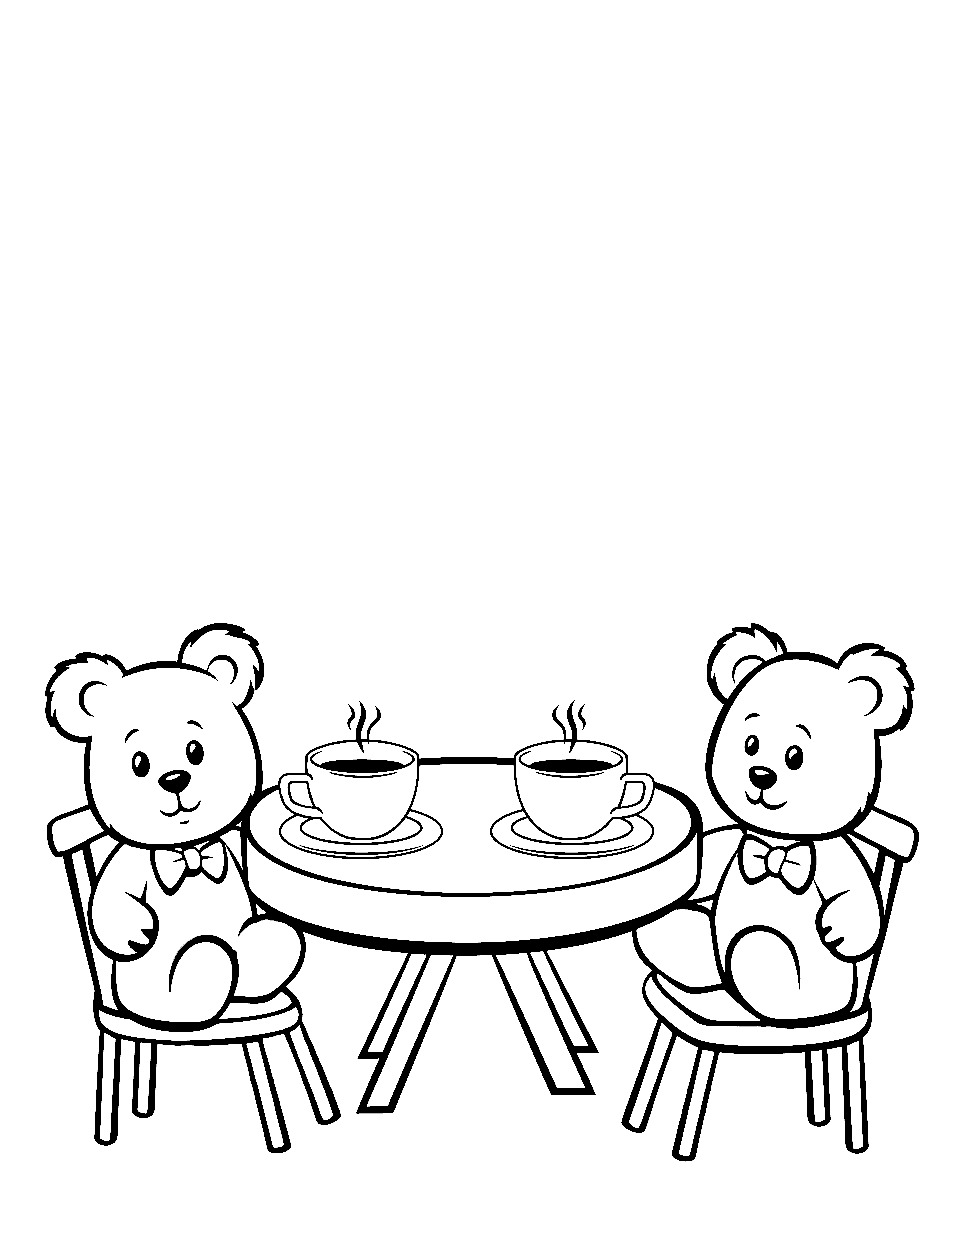 Teddy Bear Tea Party Coloring Page - Teddy bears sitting around a table with tea set.